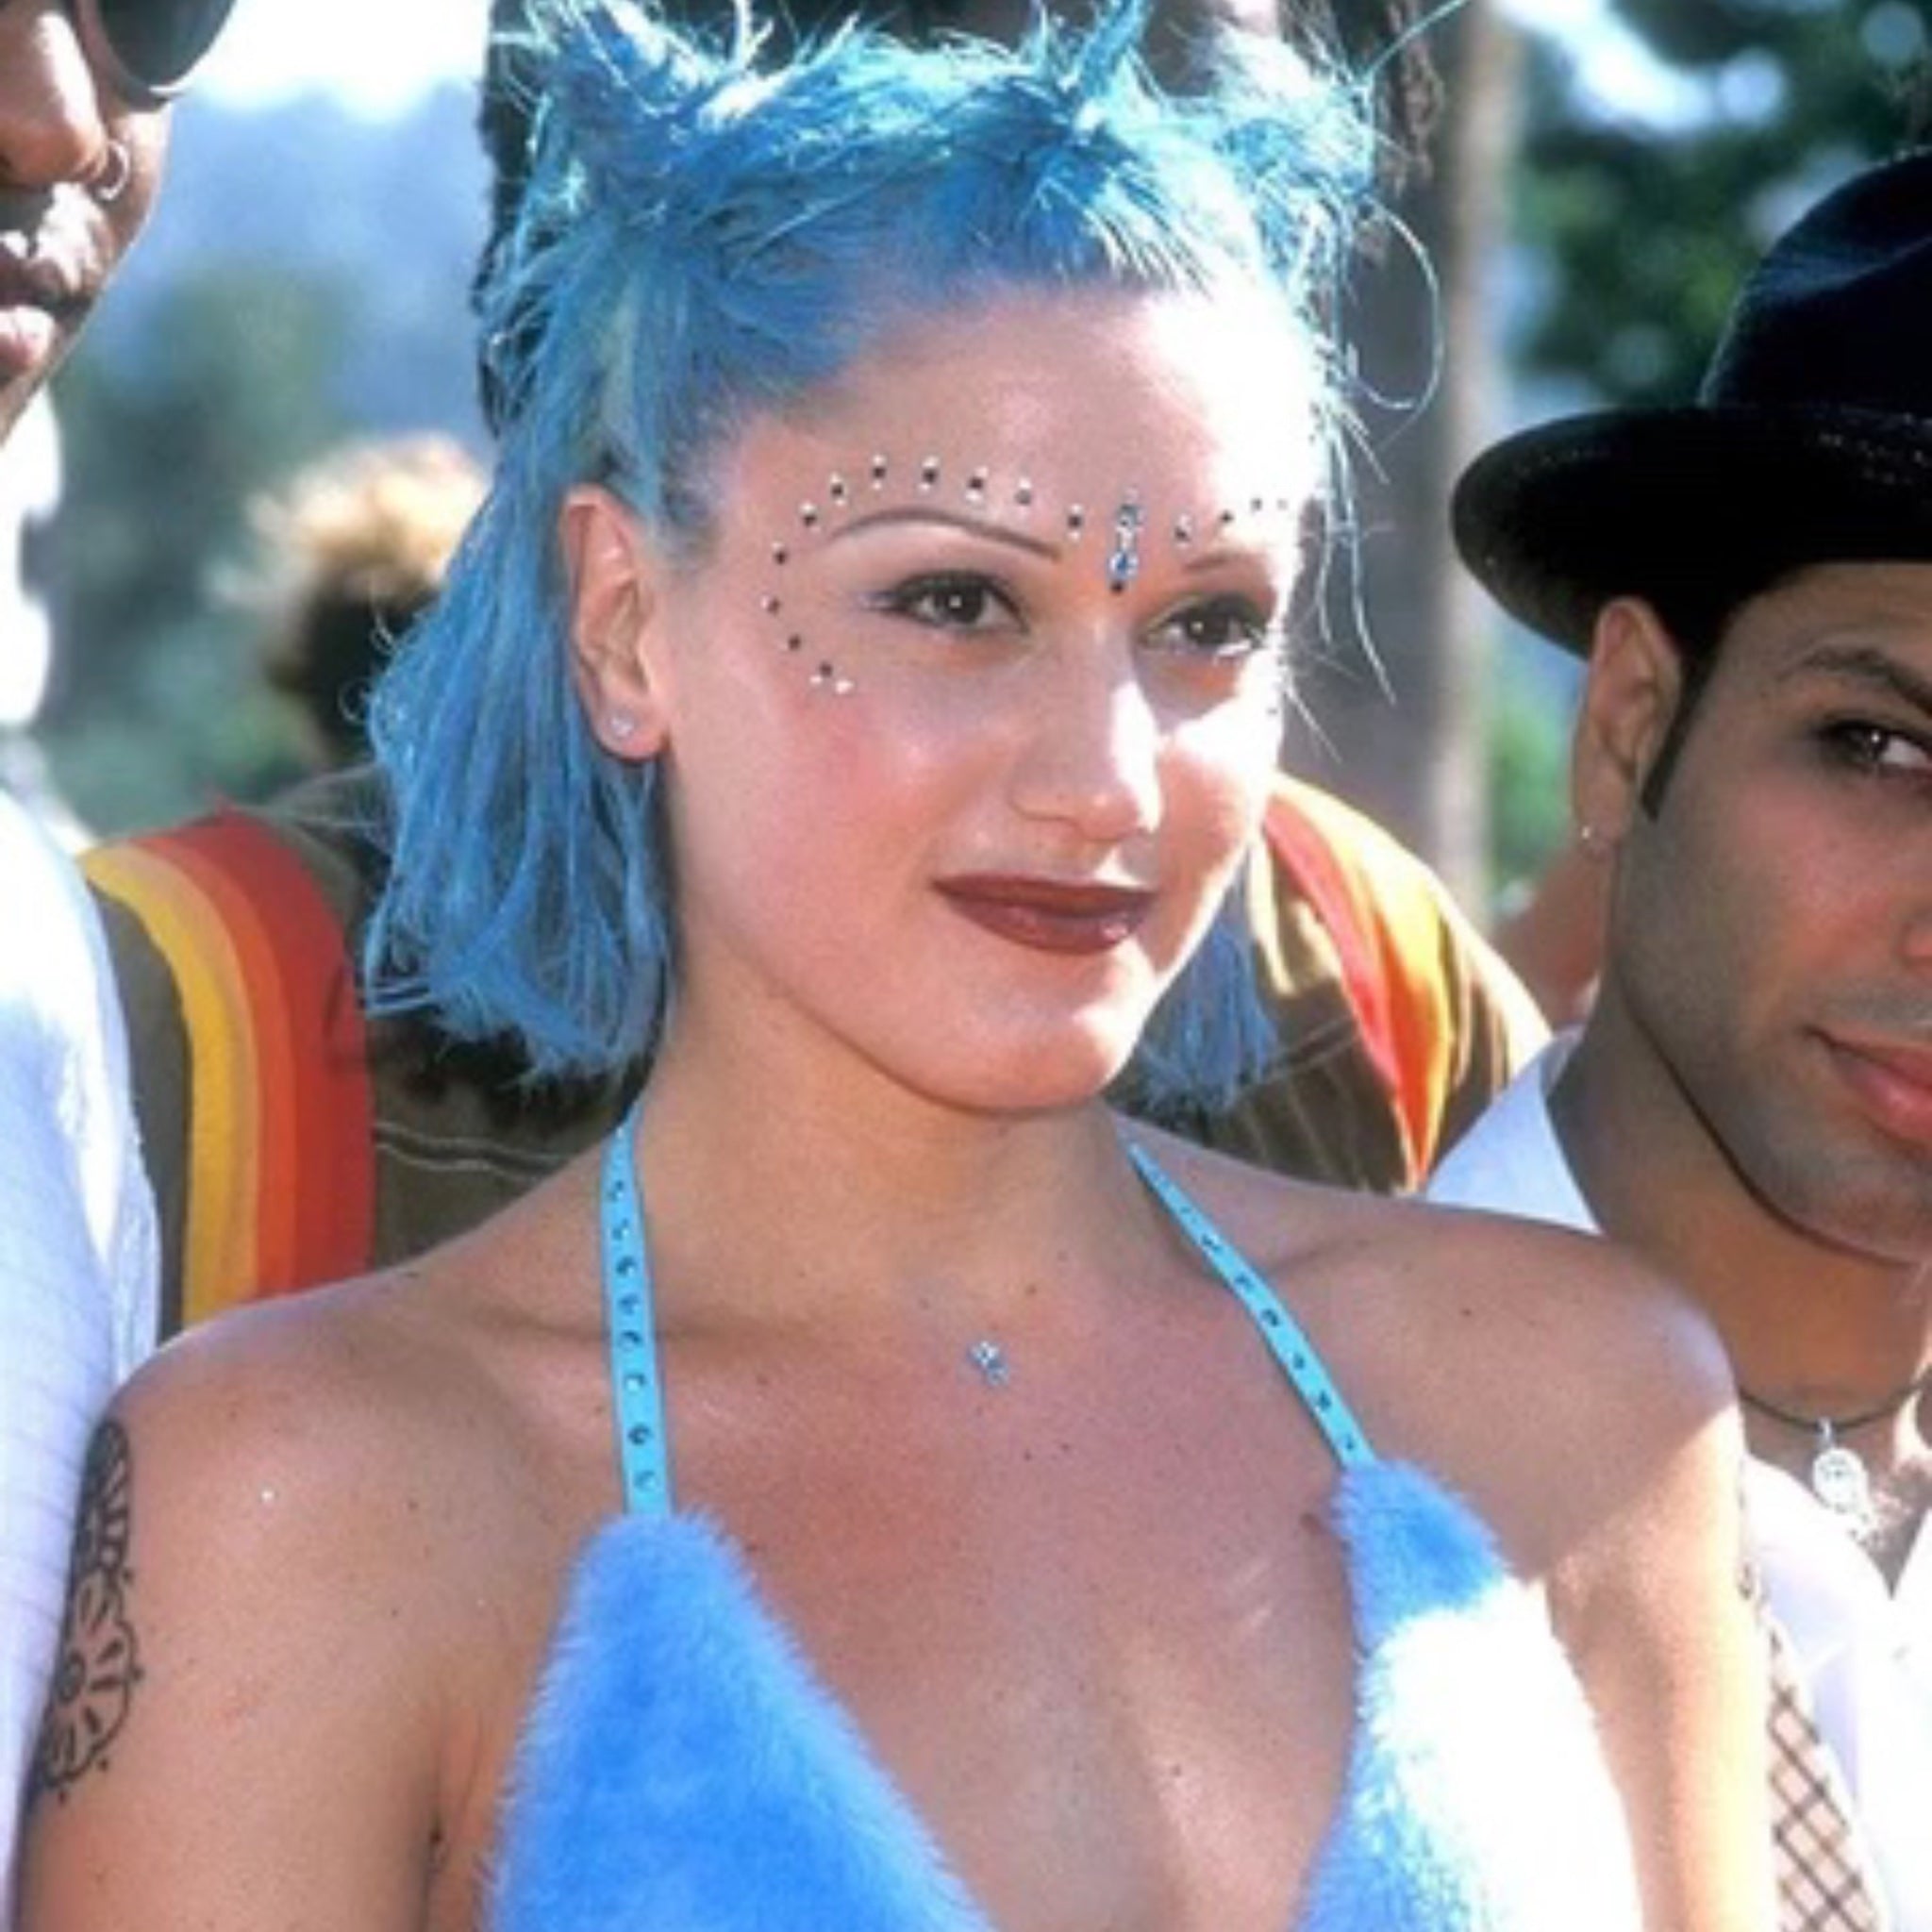 Gwen Stefani from No doubt with blue hair and fun makeup